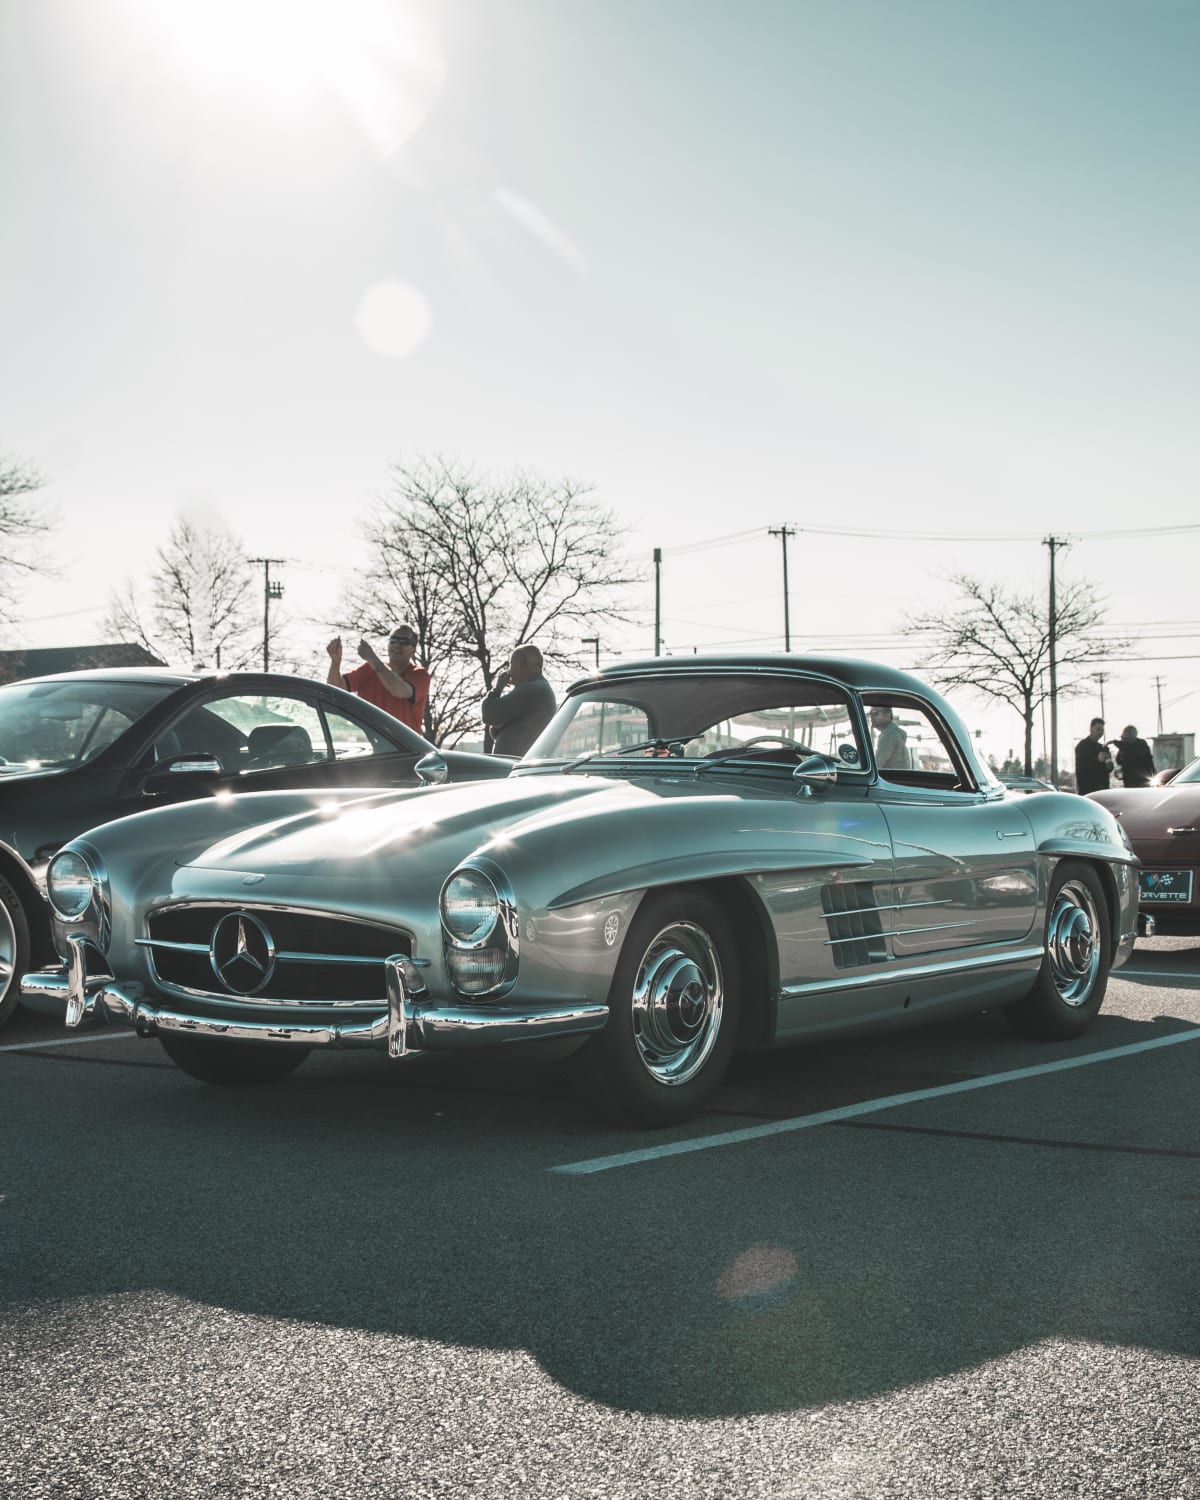 Mercedes-Benz 300SL Roadster that showed up at a local Cars & Coffee Sunday.